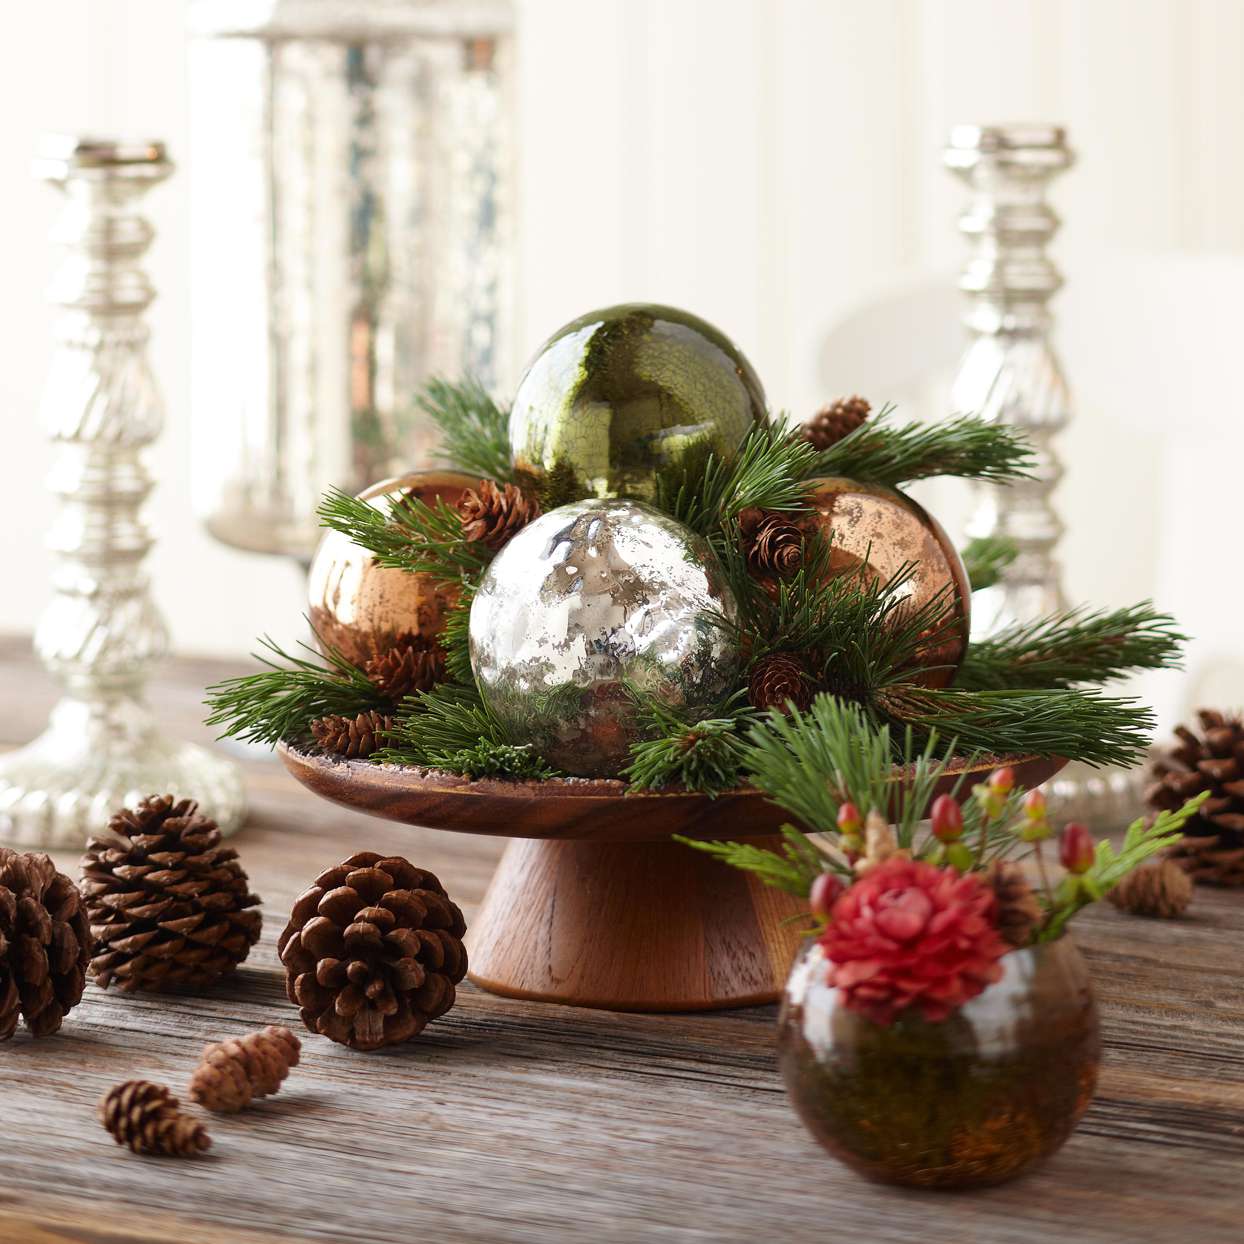 Combine Greenery and Ornaments